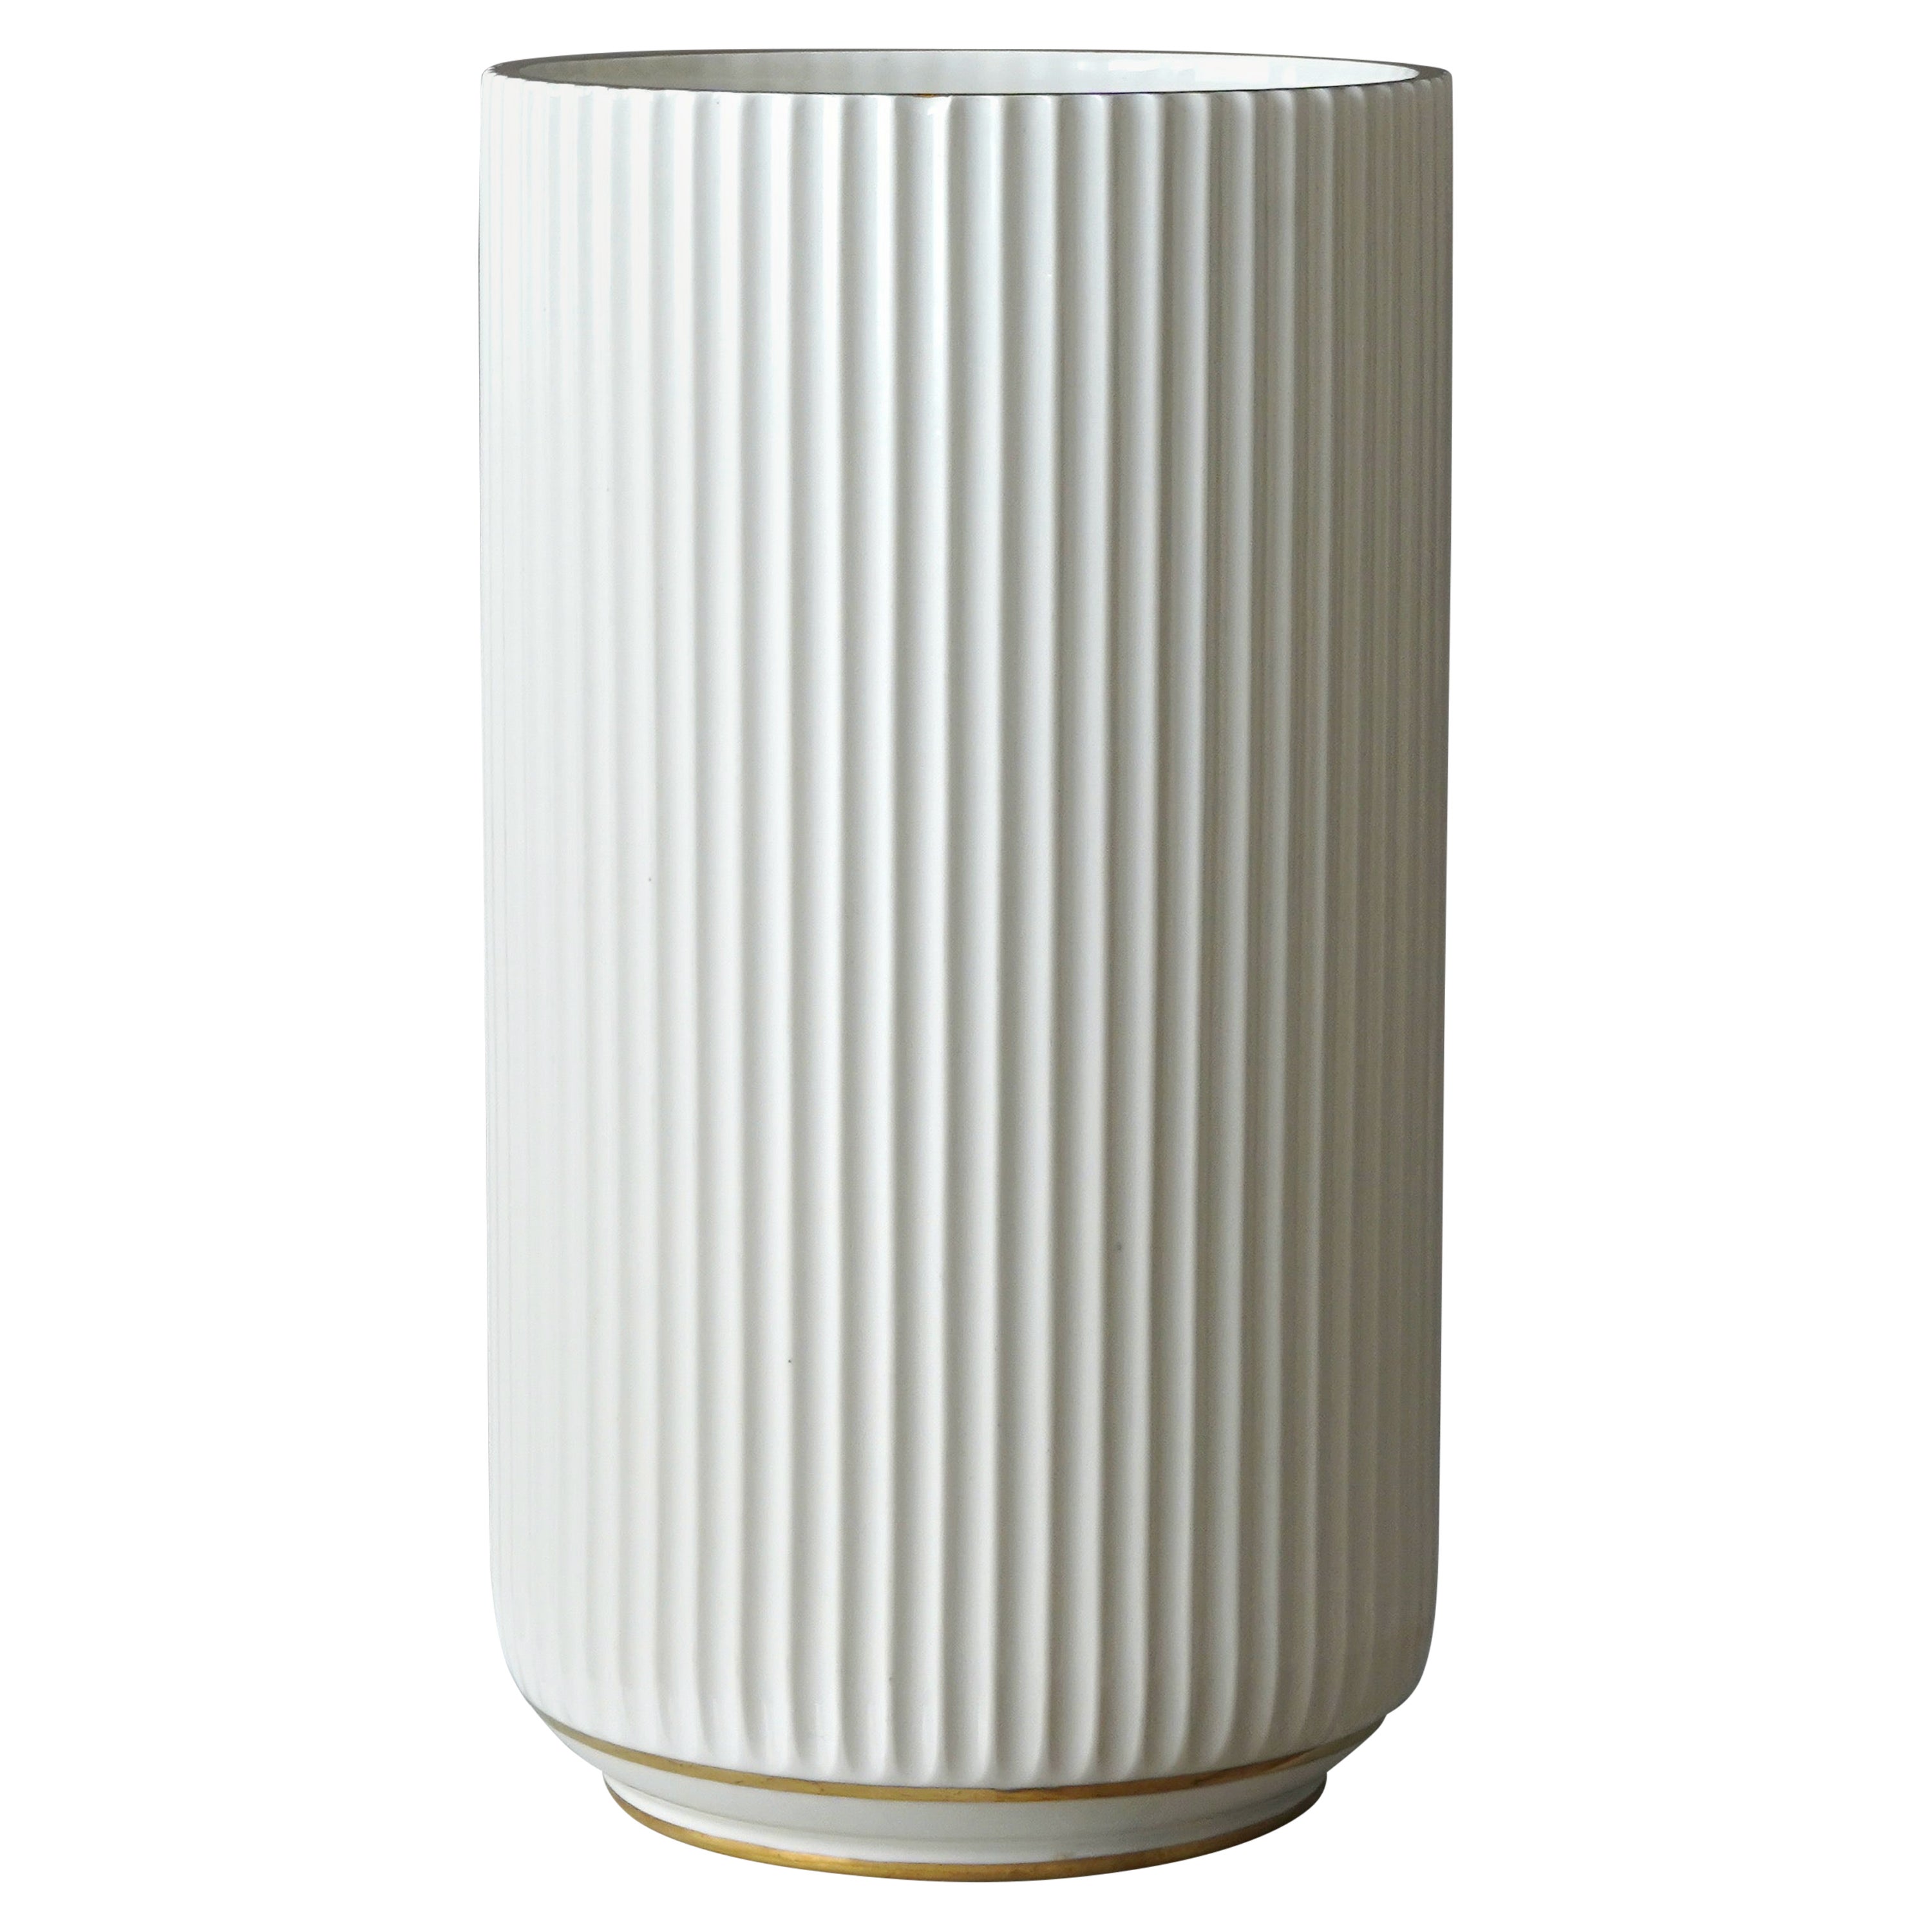 Early and Largest Lyngby Porcelain Vase with Gold Decoration, 1936-1940, Denmark For Sale